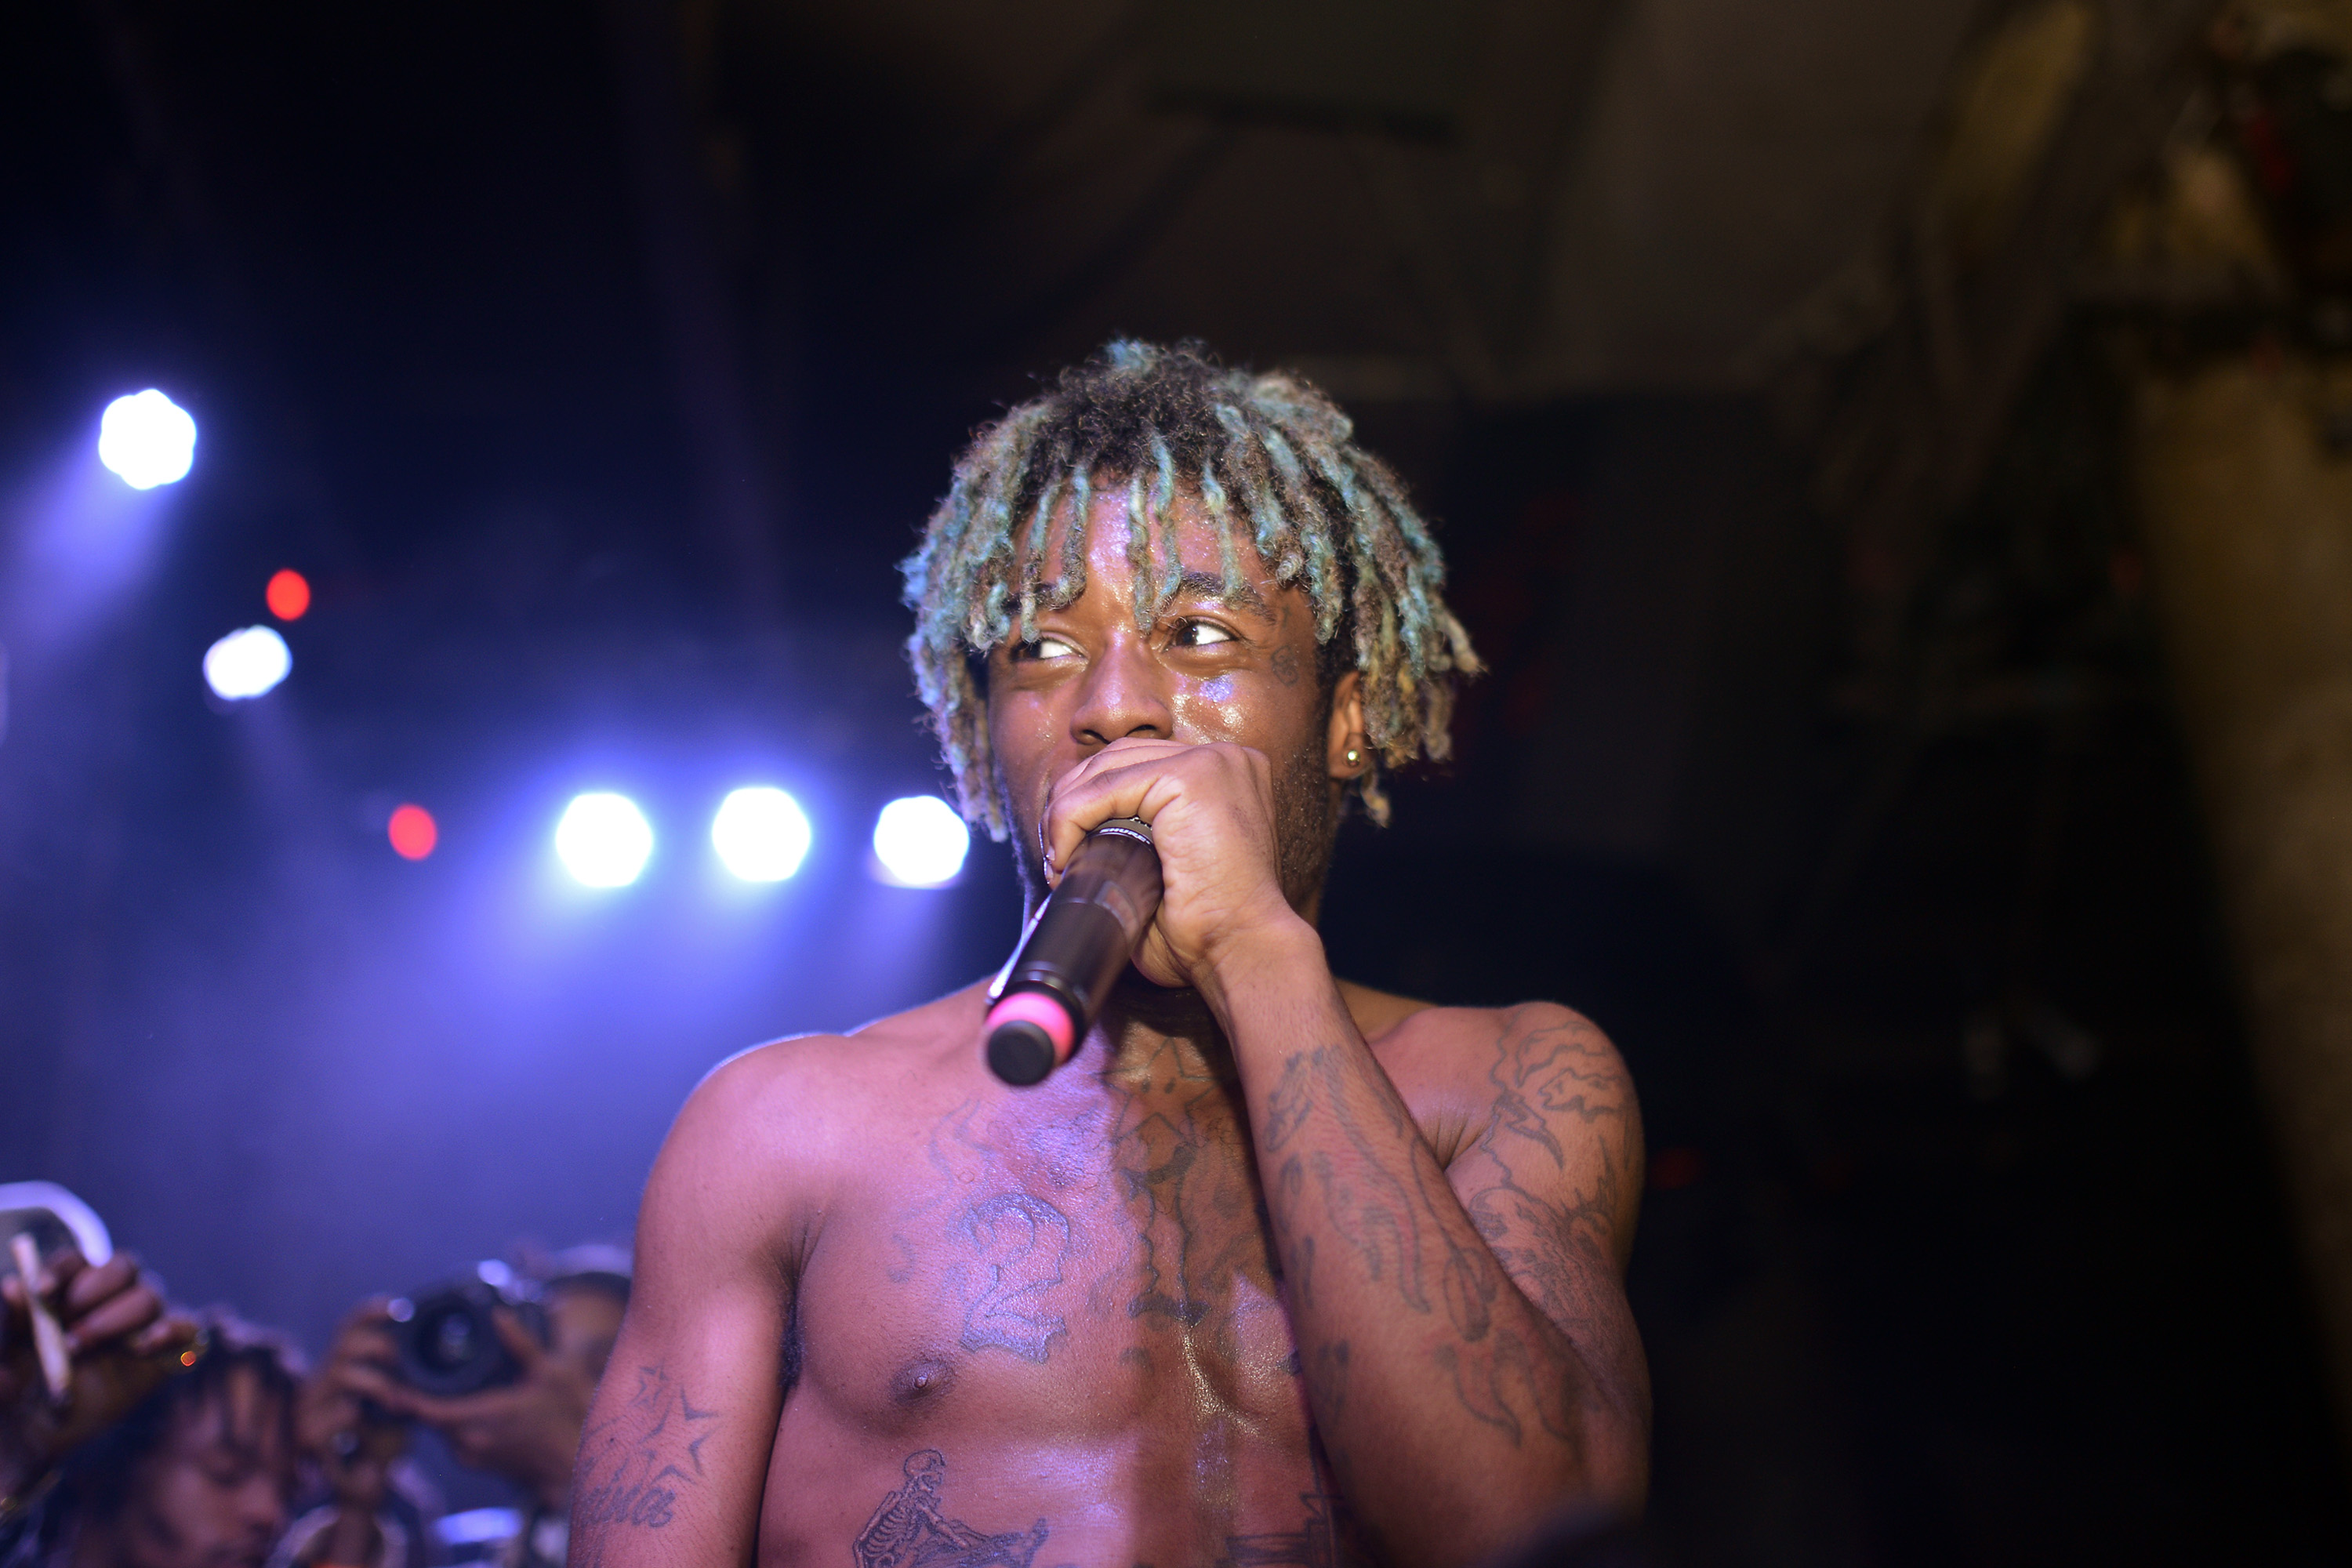 Lil Uzi Vert and Playboi In Concert - New York, NY